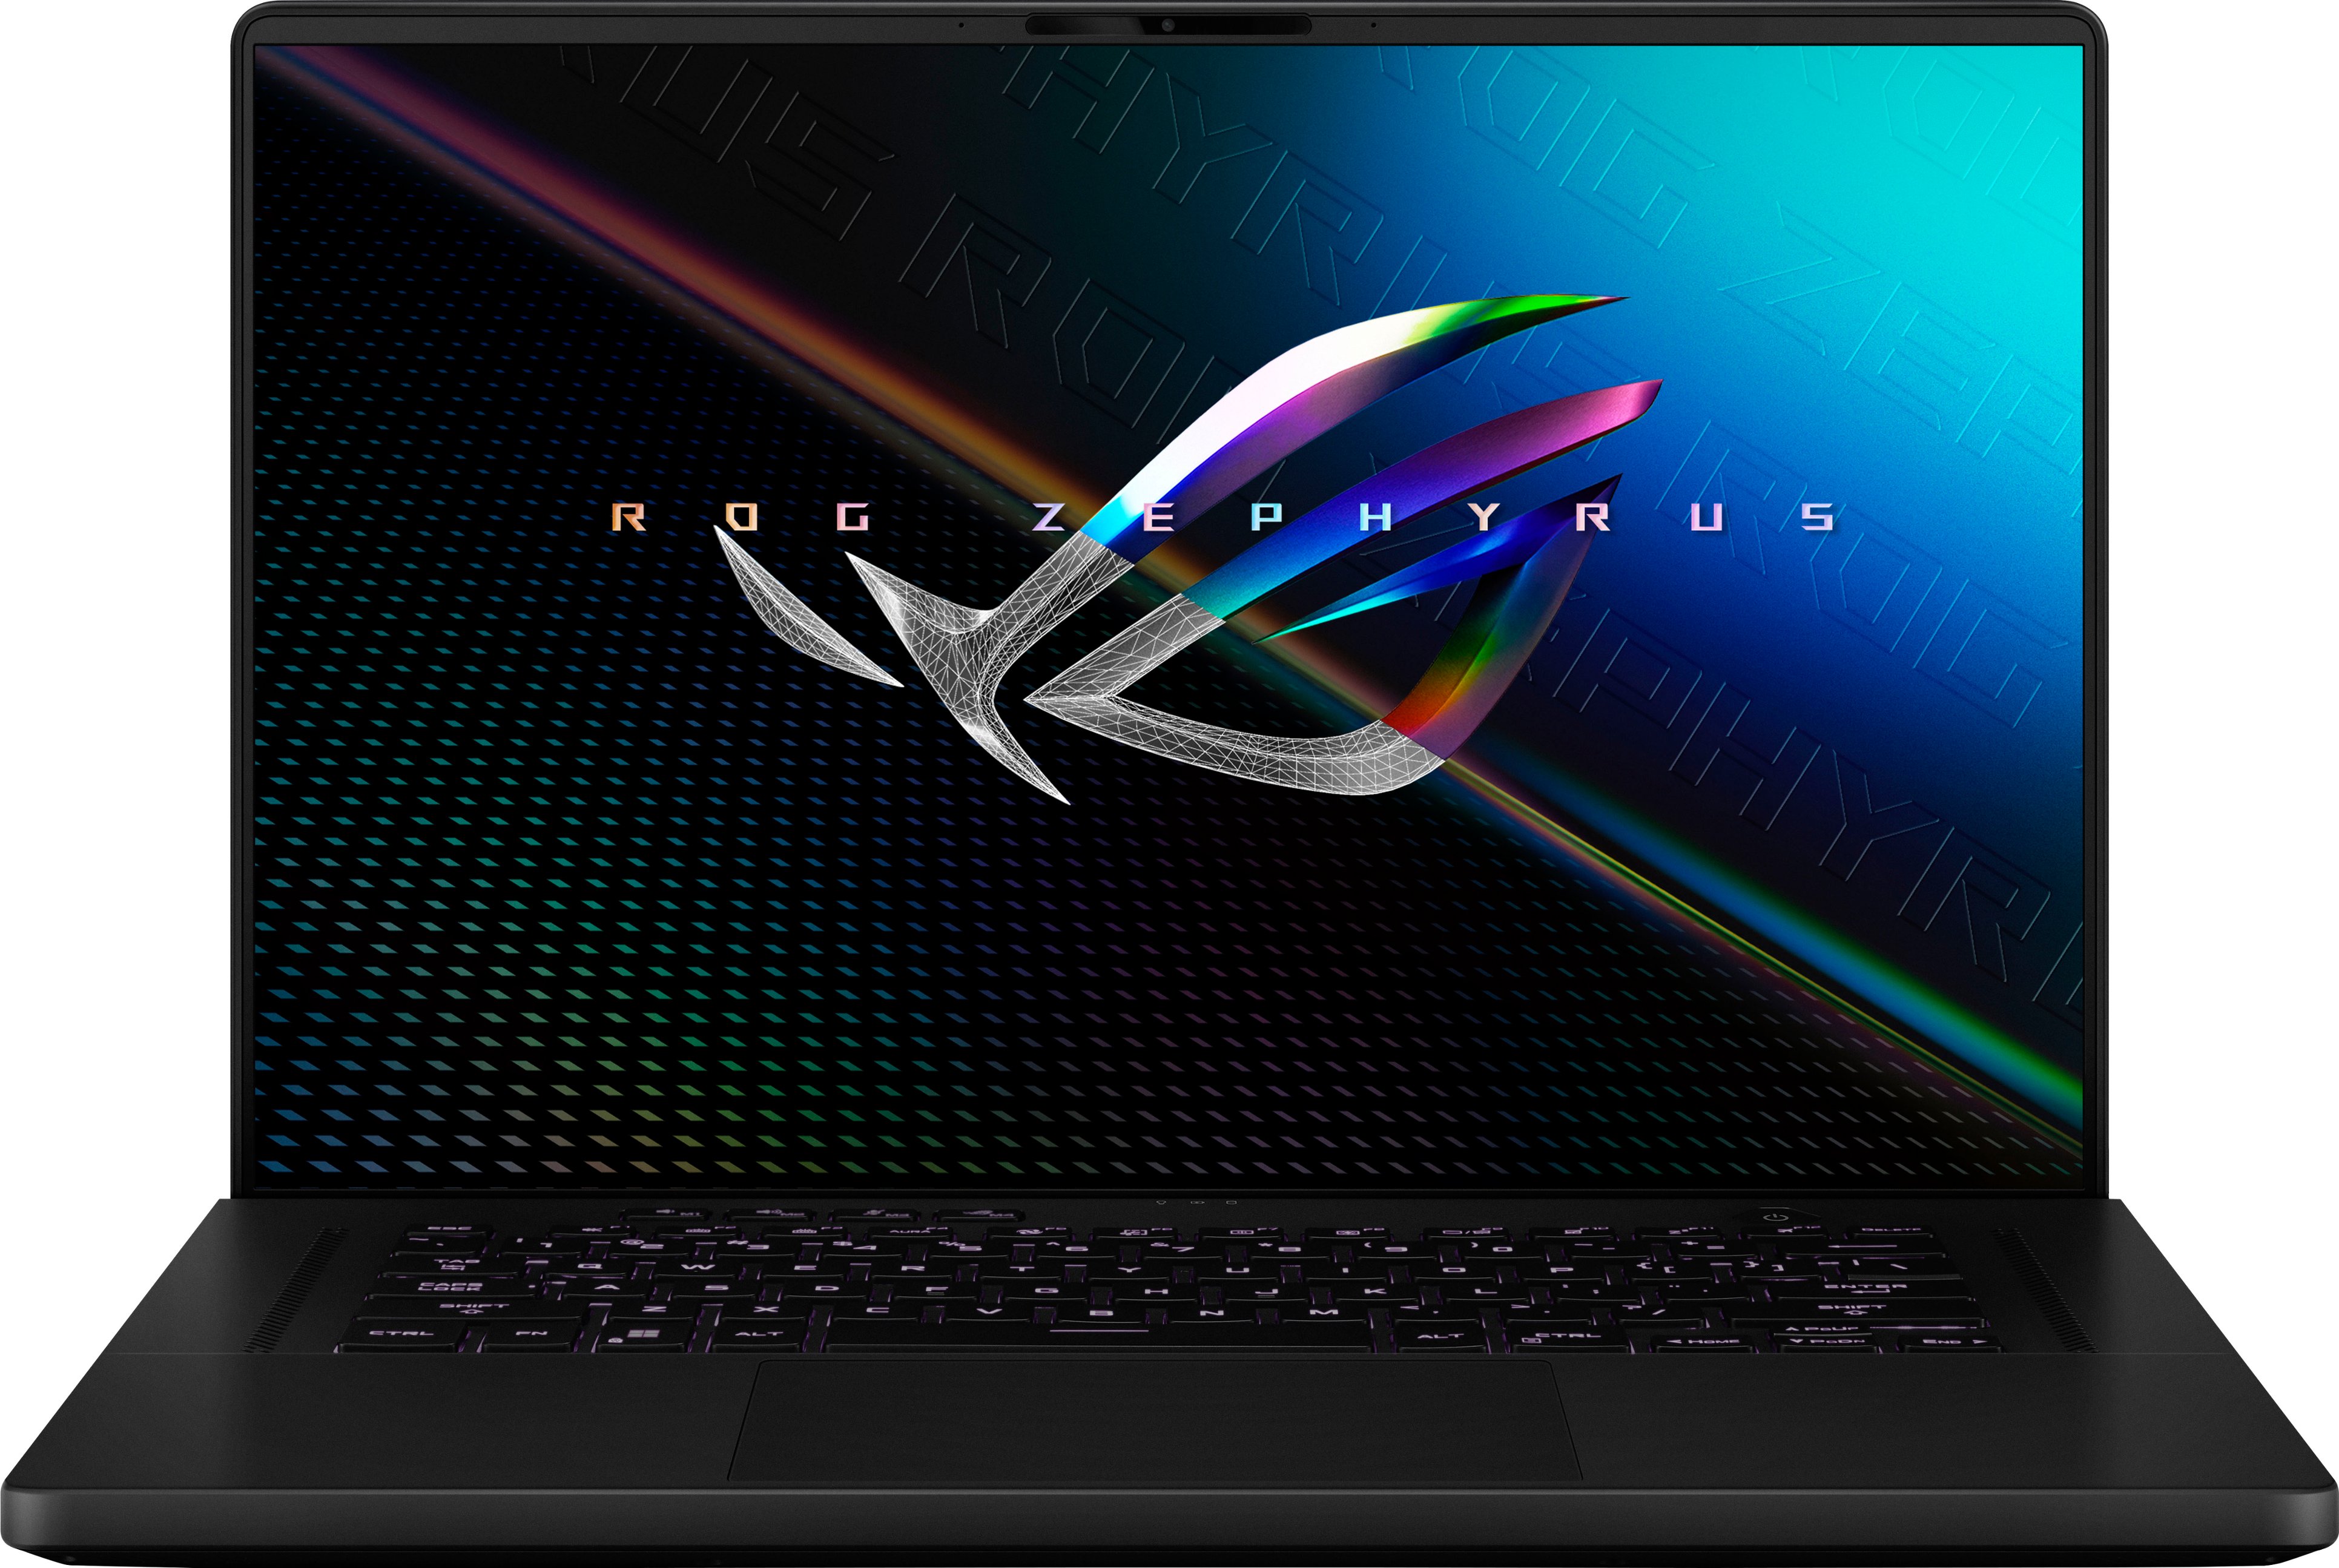 ASUS TUF 15.6 Gaming Laptop 144hz FHD Intel Core i7 with 16GB Memory  NVIDIA GeForce RTX 4060 512GB SSD Mecha Grey FX507ZV-F15.I74060 - Best Buy